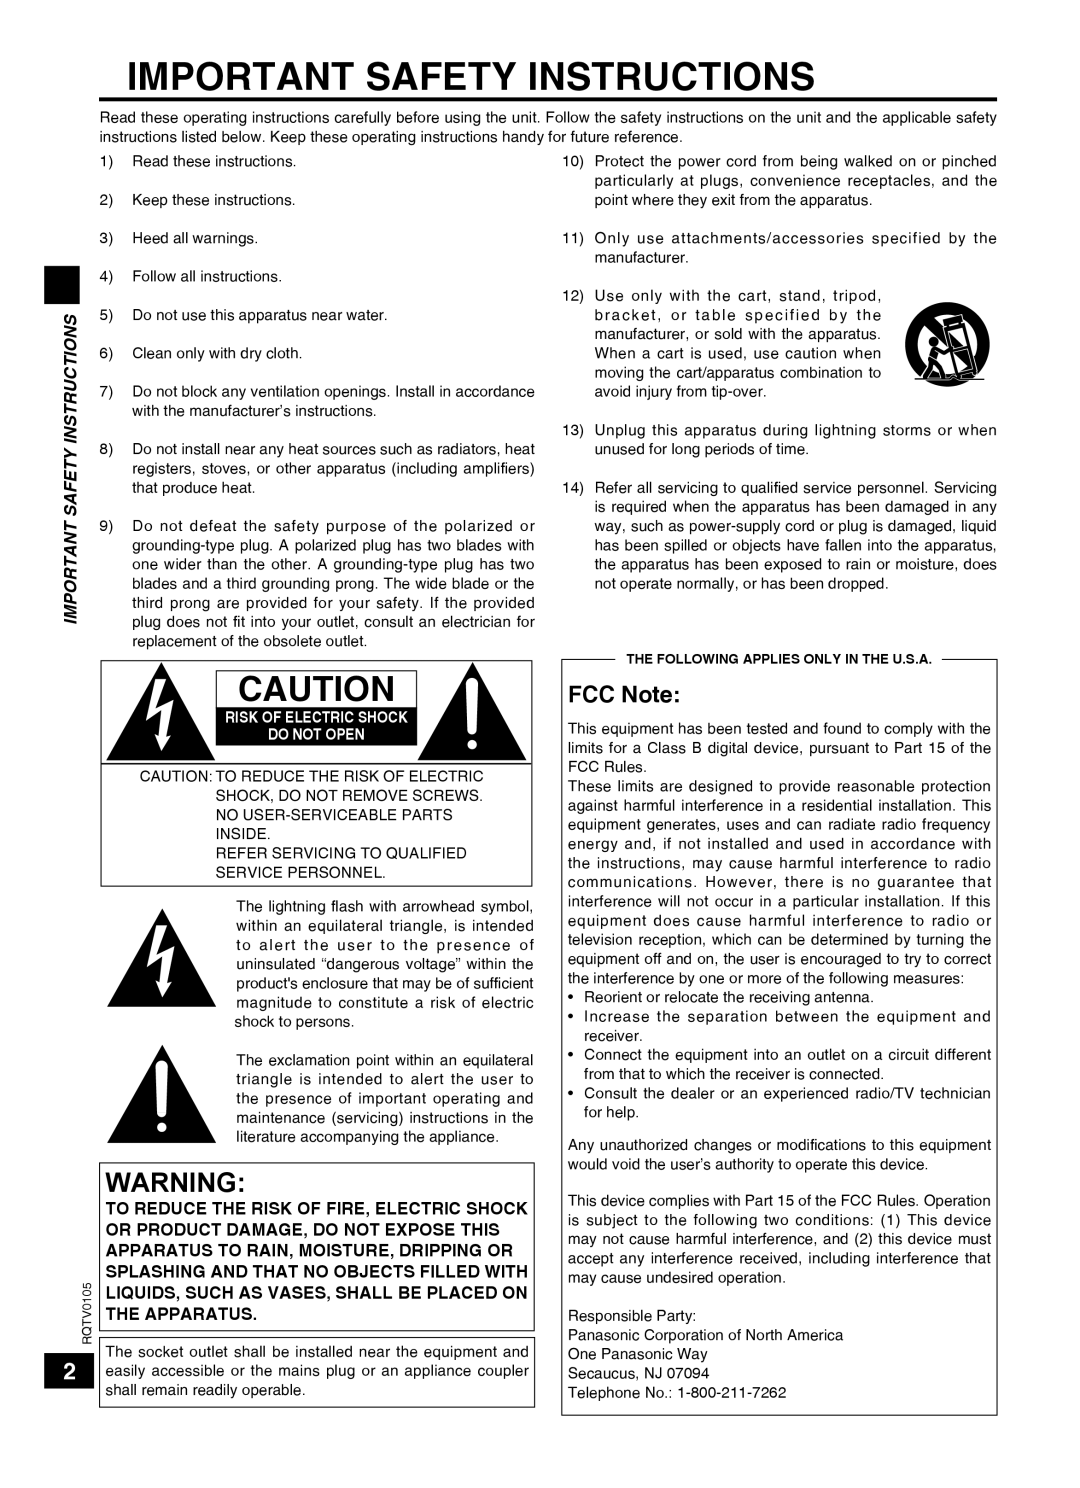 Panasonic SC-HT40 specifications FCC Note, Important Safety Instructions, Risk Of Electric Shock Do Not Open 